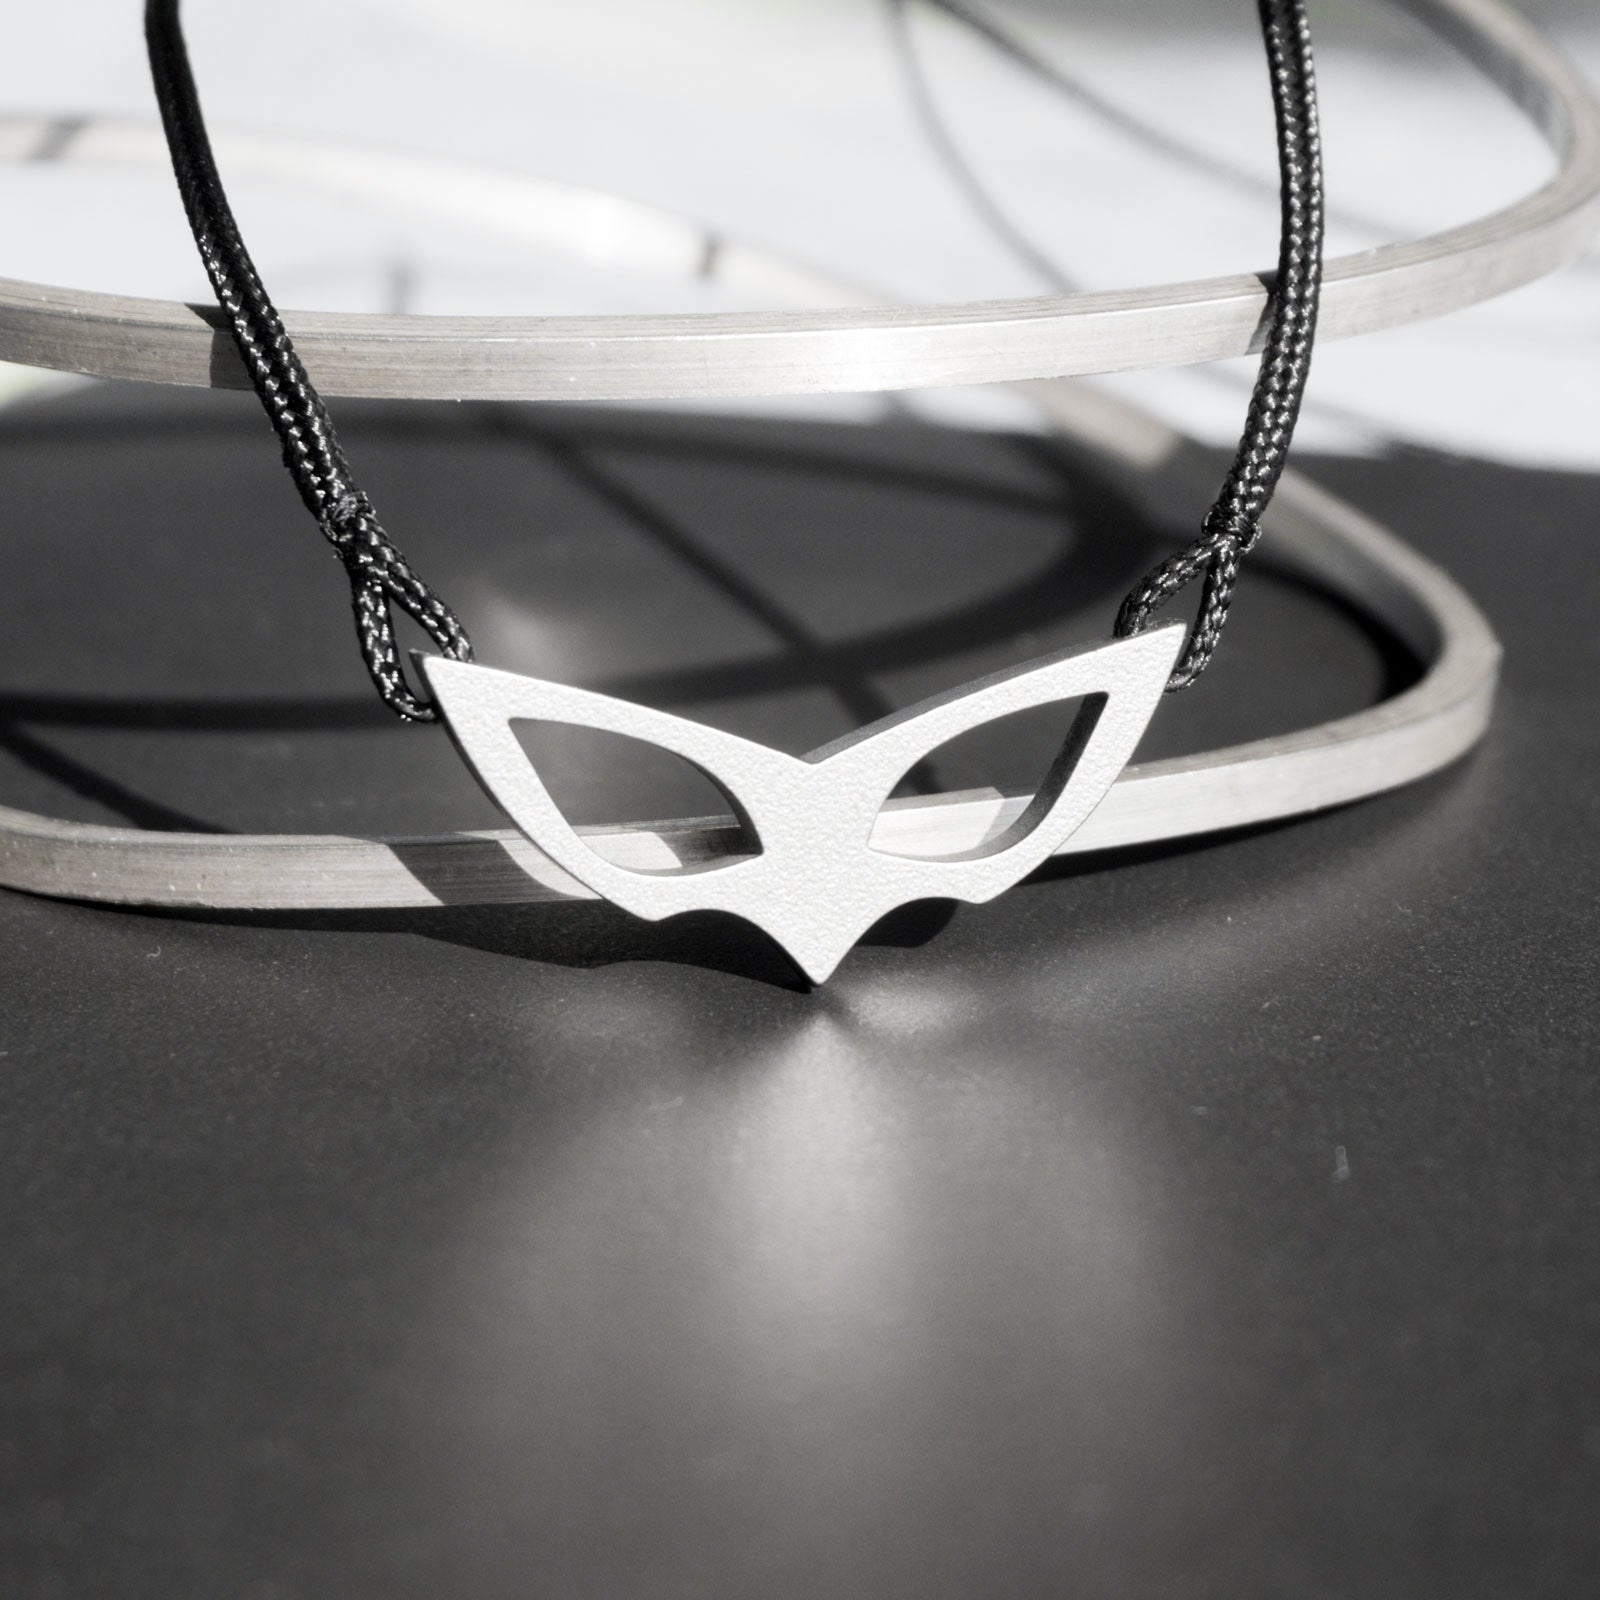 Joker's mask as a pendant, perfectly recreated with faithful proportions. A seemingly simple 2D rendition of the mask and a minimalist, timeless piece to wear. Entirely handcrafted from grade 5 titanium.